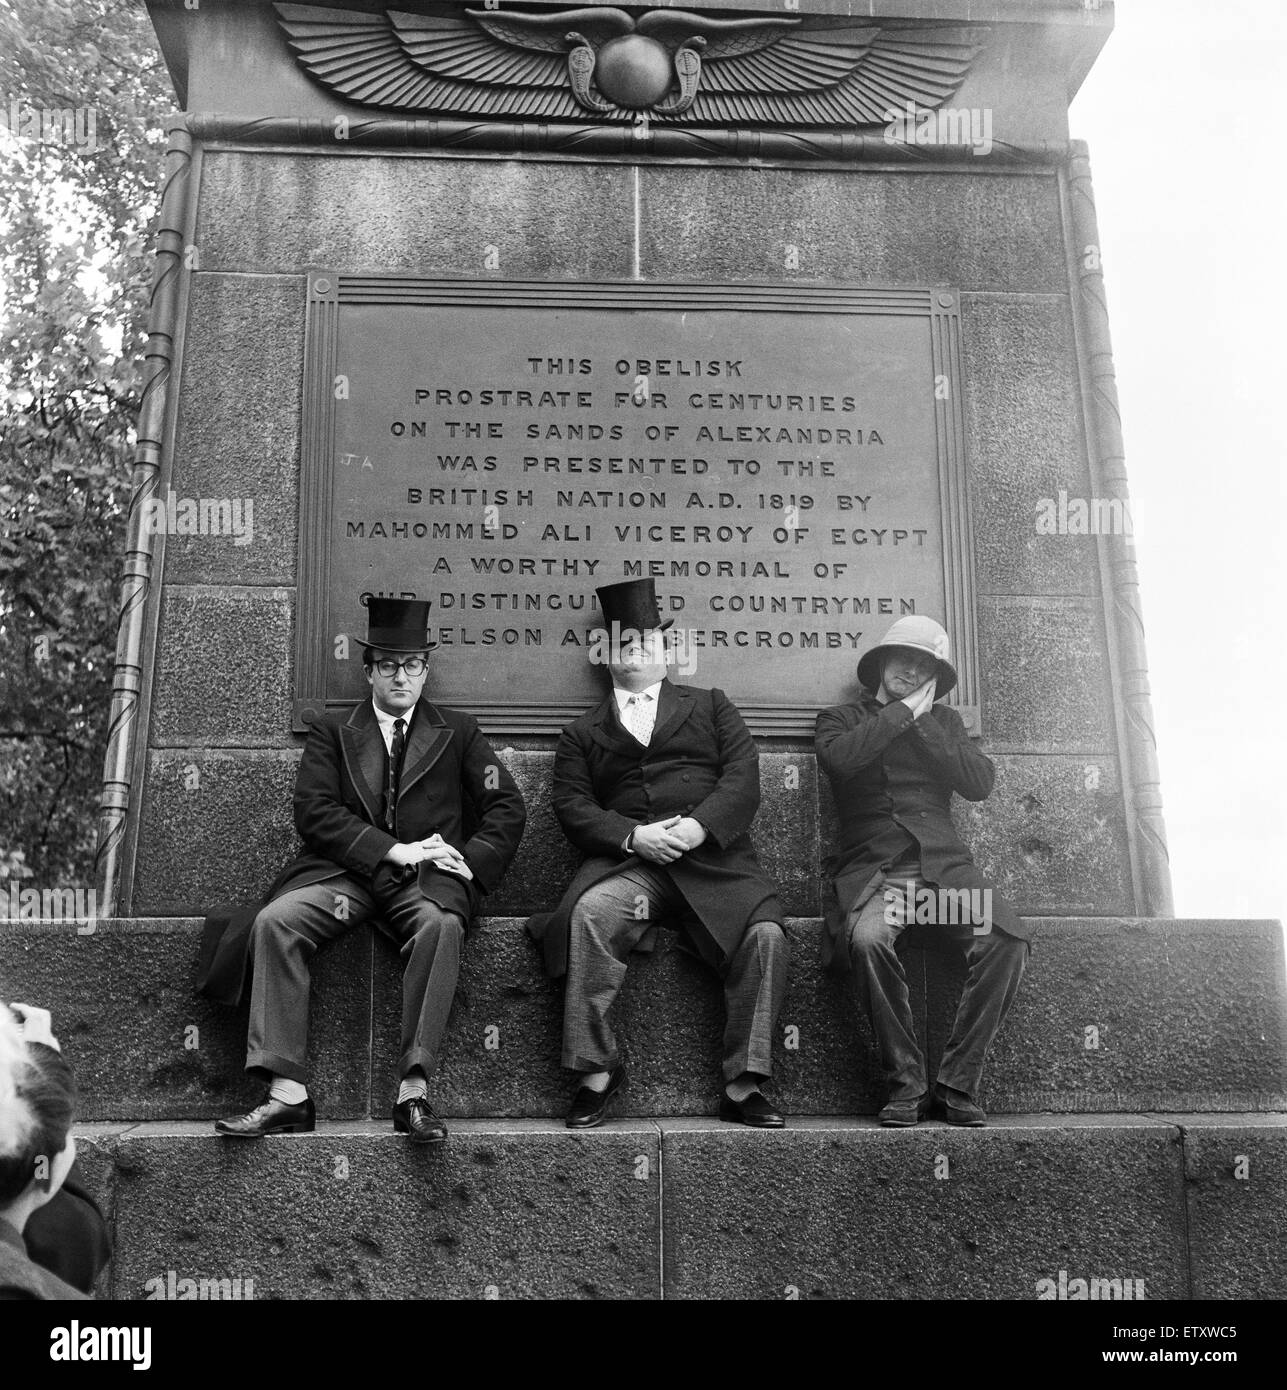 The Goons of BBC fame at Cleopatra's Needle on the Embankment, London. The trip was to get material for their programme 'The Reason Why'. The material they got on why the Needle was discovered was put in a 30 minute radio show. From left to right are Pete Stock Photo